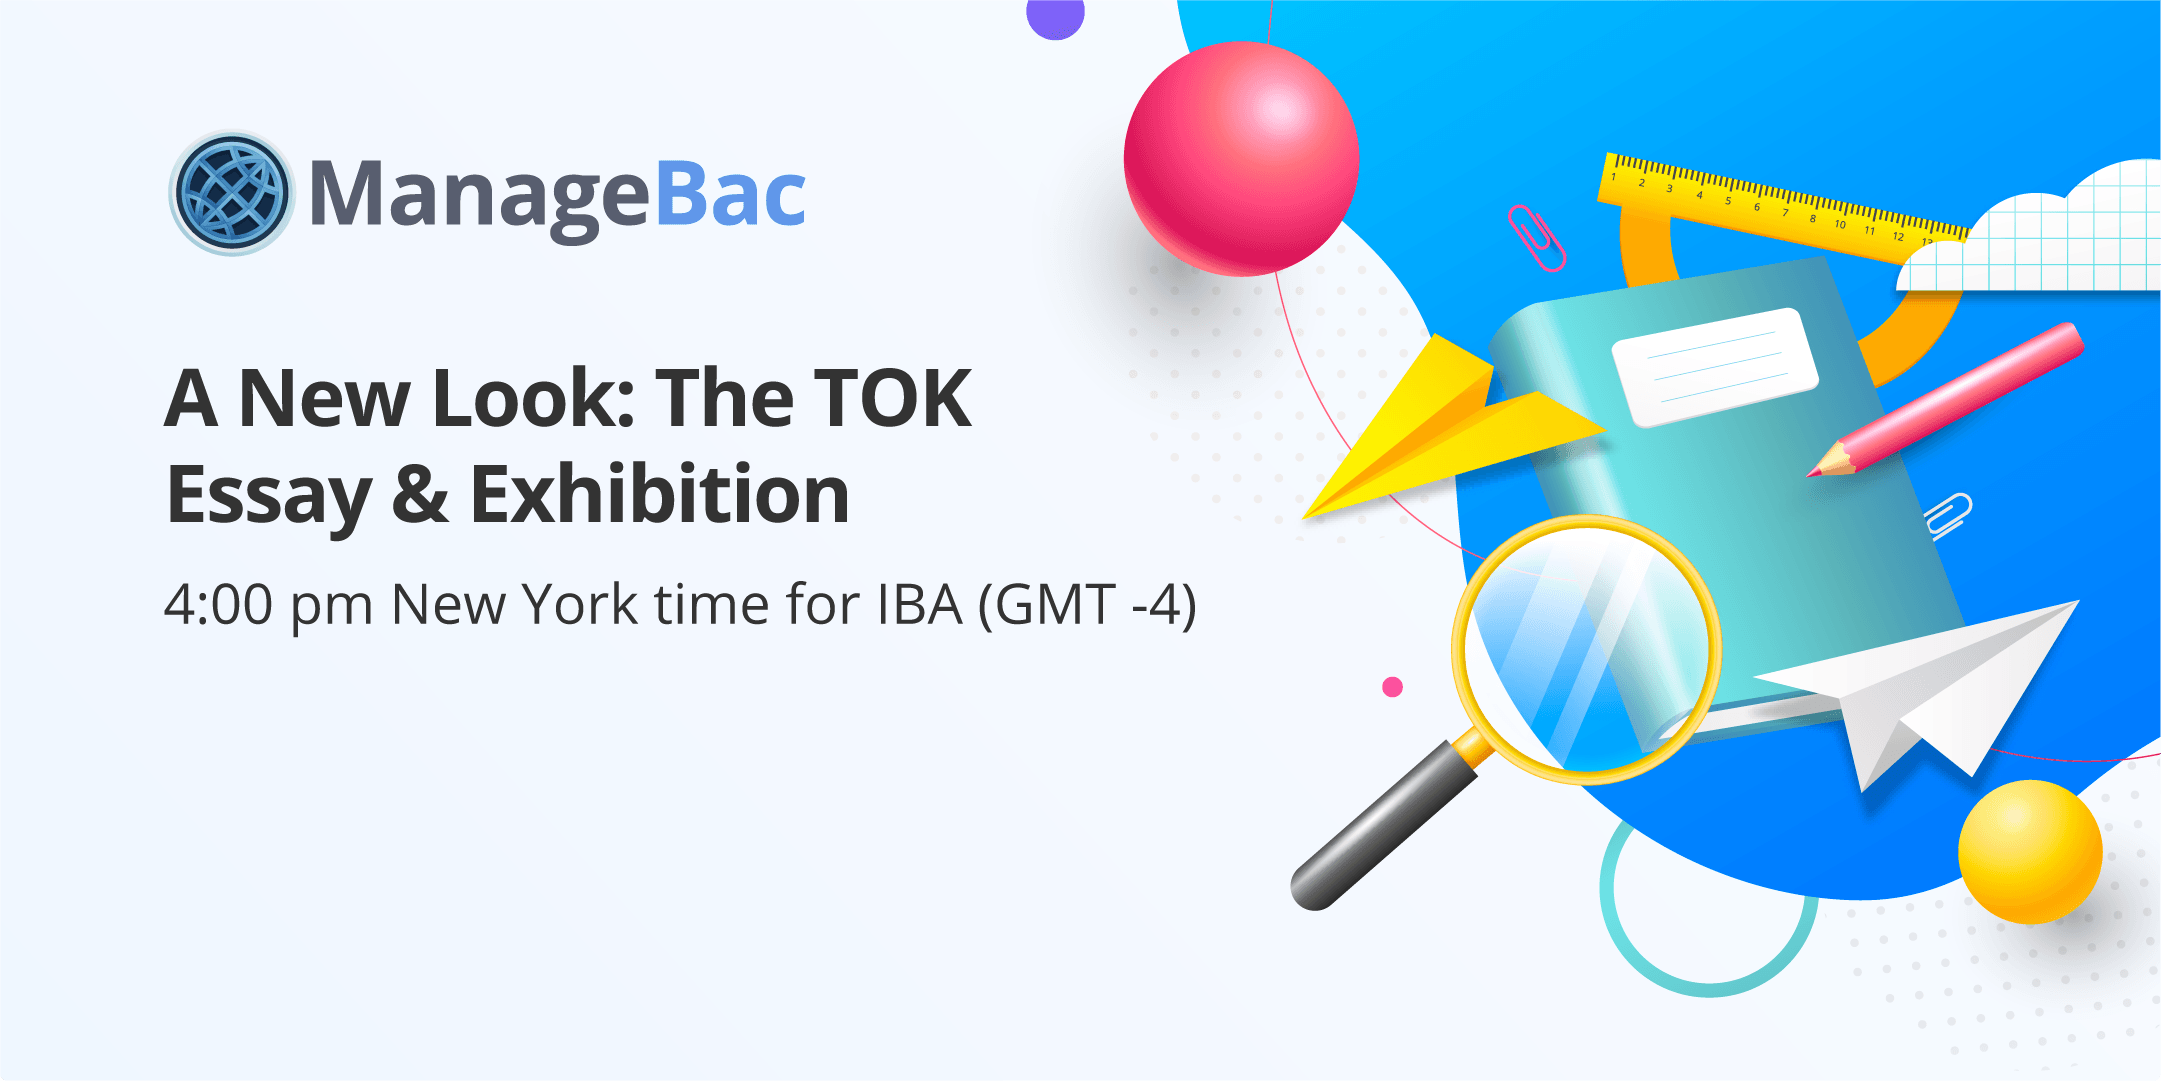 A New Look: The TOK Essay & Exhibition